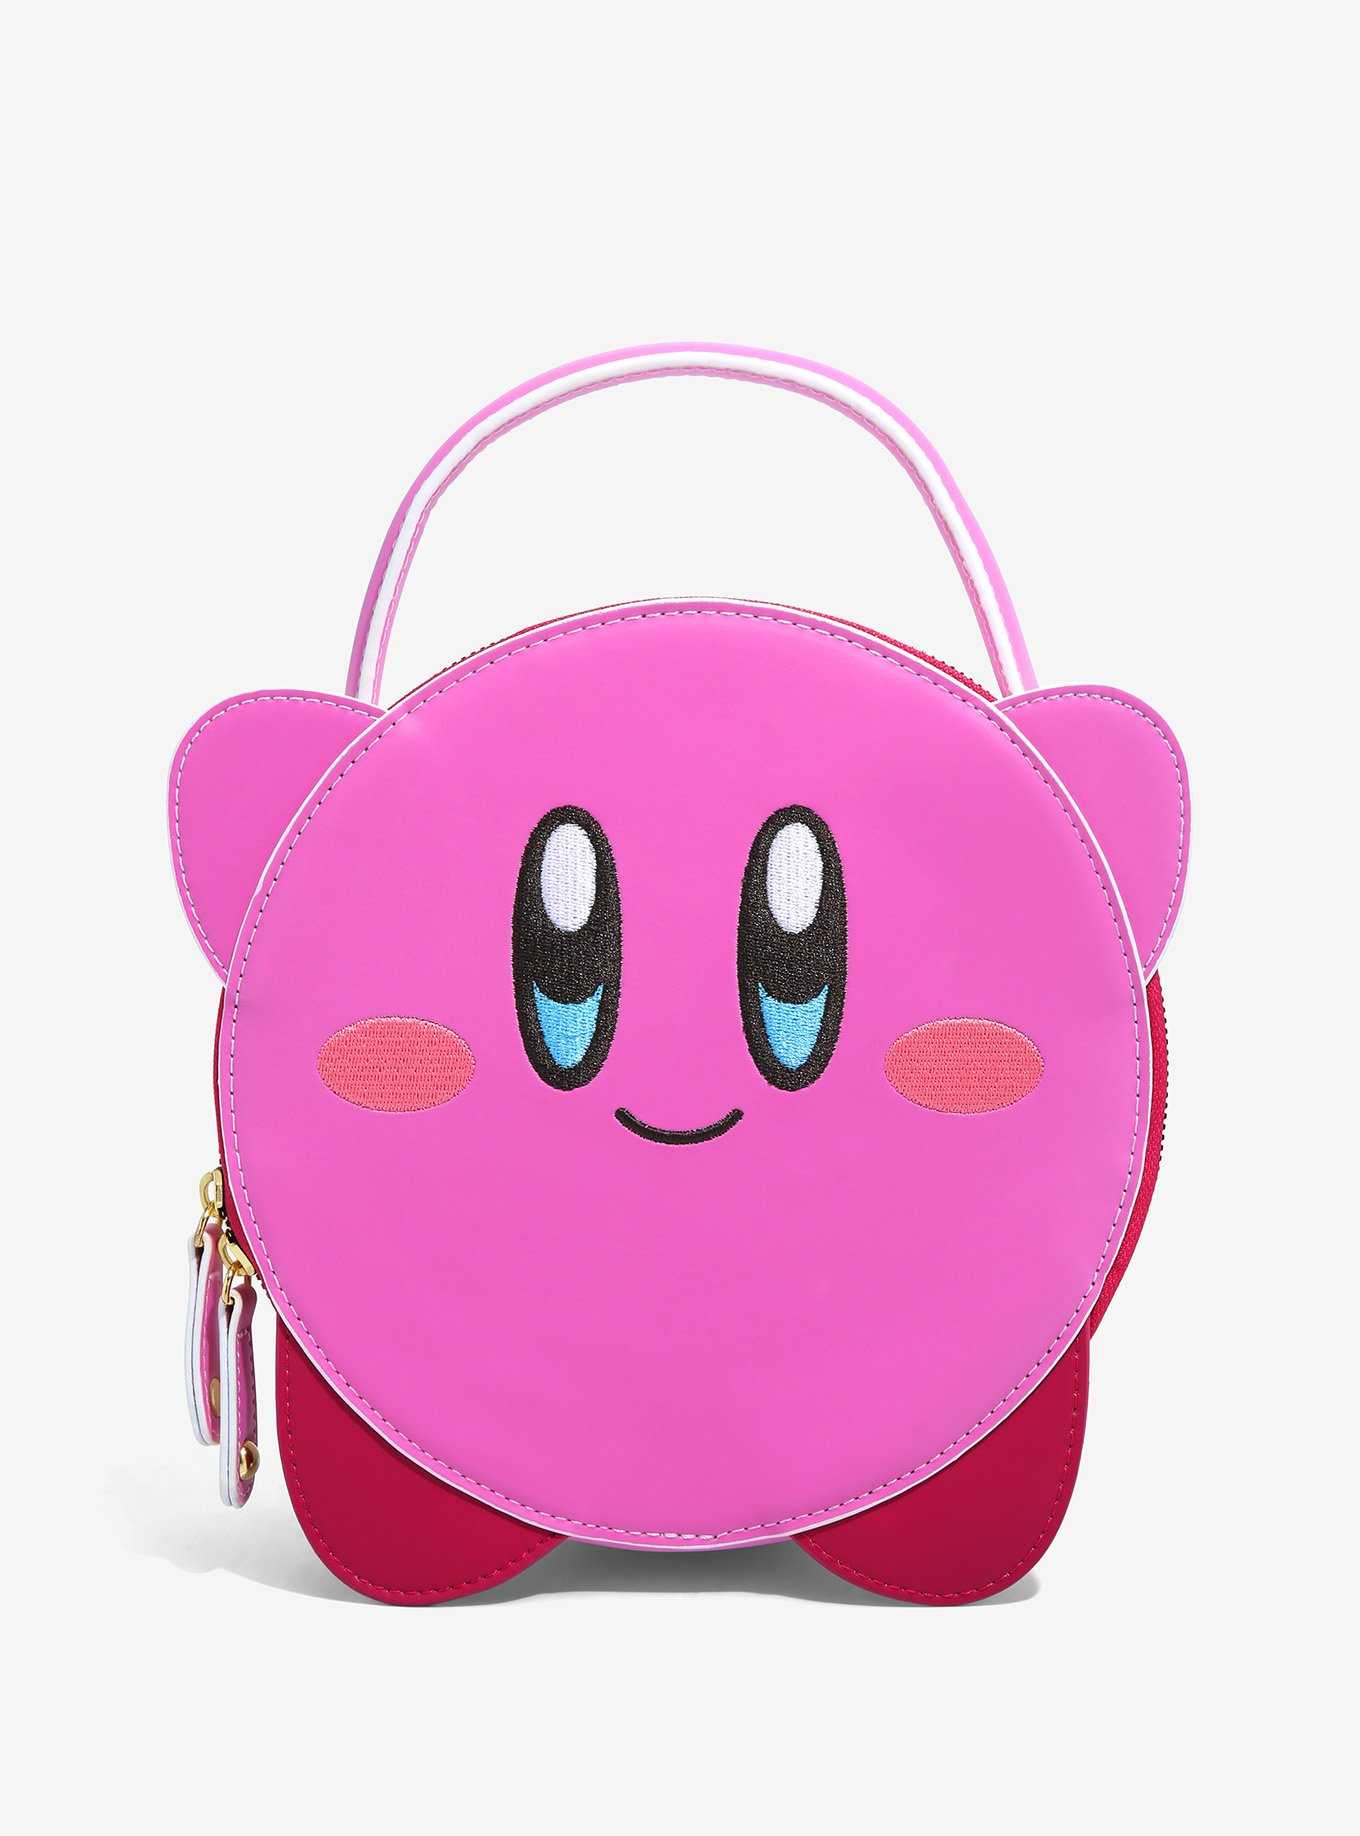 Nintendo Kirby Figural Color Changing Convertible Mini Backpack - BoxLunch Exclusive, , hi-res